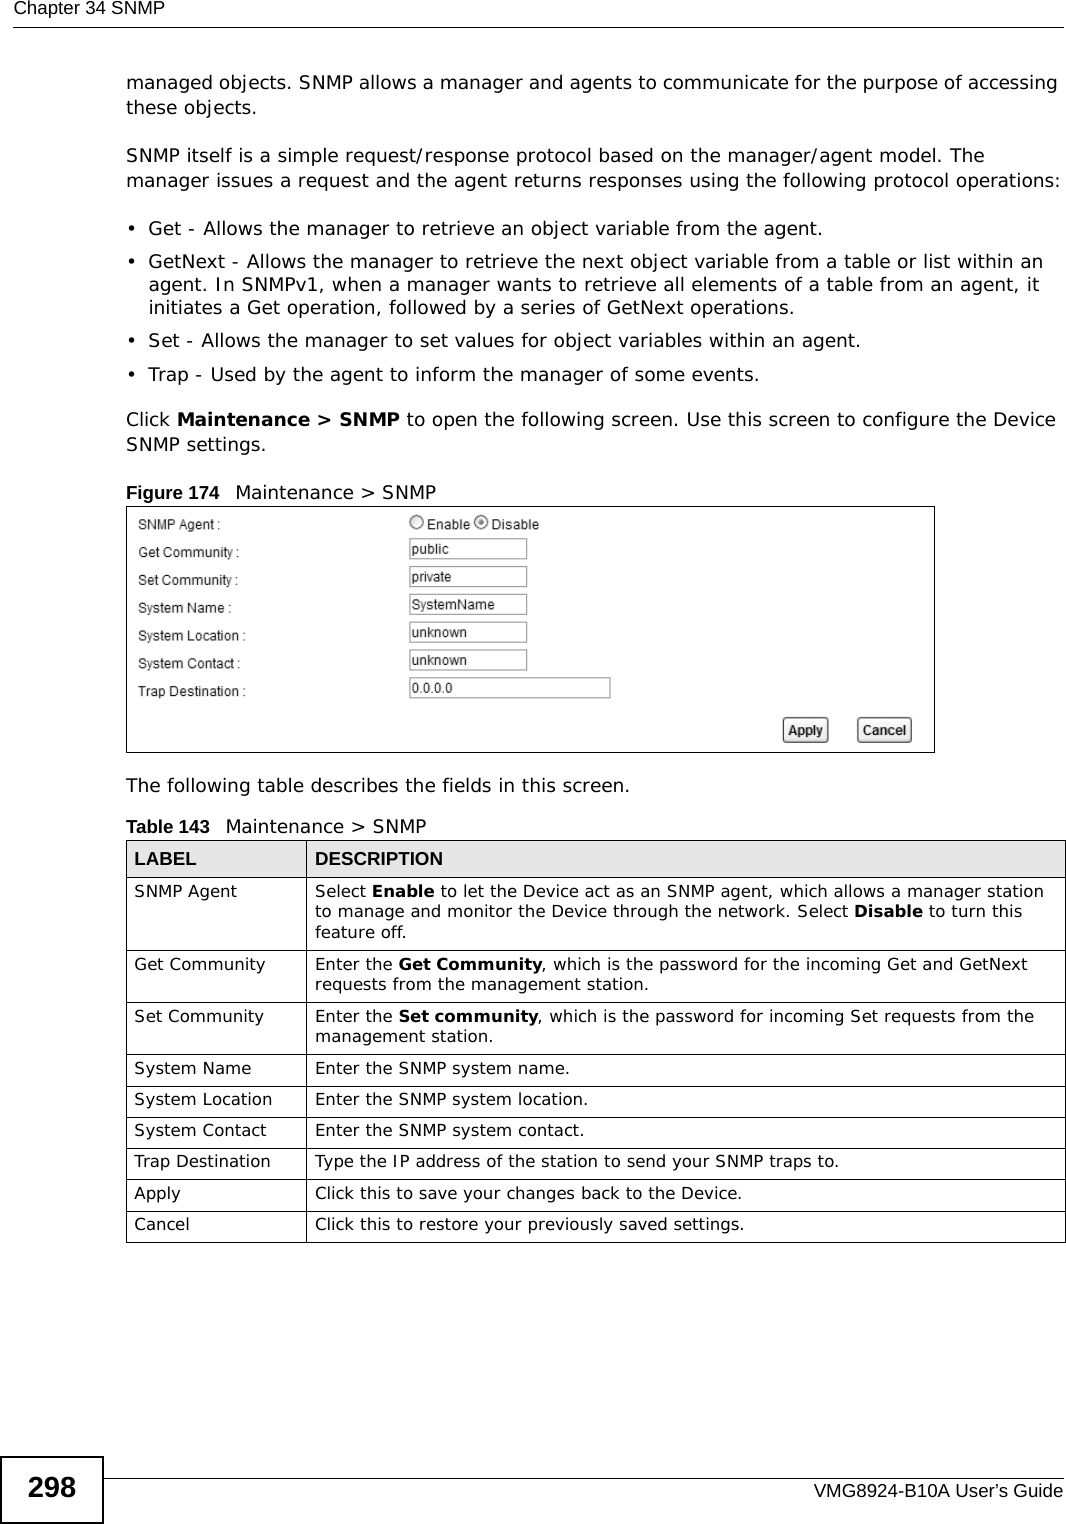 Chapter 34 SNMPVMG8924-B10A User’s Guide298managed objects. SNMP allows a manager and agents to communicate for the purpose of accessing these objects.SNMP itself is a simple request/response protocol based on the manager/agent model. The manager issues a request and the agent returns responses using the following protocol operations:• Get - Allows the manager to retrieve an object variable from the agent. • GetNext - Allows the manager to retrieve the next object variable from a table or list within an agent. In SNMPv1, when a manager wants to retrieve all elements of a table from an agent, it initiates a Get operation, followed by a series of GetNext operations. • Set - Allows the manager to set values for object variables within an agent. • Trap - Used by the agent to inform the manager of some events.Click Maintenance &gt; SNMP to open the following screen. Use this screen to configure the Device SNMP settings. Figure 174   Maintenance &gt; SNMP The following table describes the fields in this screen. Table 143   Maintenance &gt; SNMPLABEL DESCRIPTIONSNMP Agent Select Enable to let the Device act as an SNMP agent, which allows a manager station to manage and monitor the Device through the network. Select Disable to turn this feature off.Get Community Enter the Get Community, which is the password for the incoming Get and GetNext requests from the management station.Set Community Enter the Set community, which is the password for incoming Set requests from the management station.System Name Enter the SNMP system name.System Location Enter the SNMP system location.System Contact Enter the SNMP system contact.Trap Destination Type the IP address of the station to send your SNMP traps to.Apply Click this to save your changes back to the Device. Cancel Click this to restore your previously saved settings.